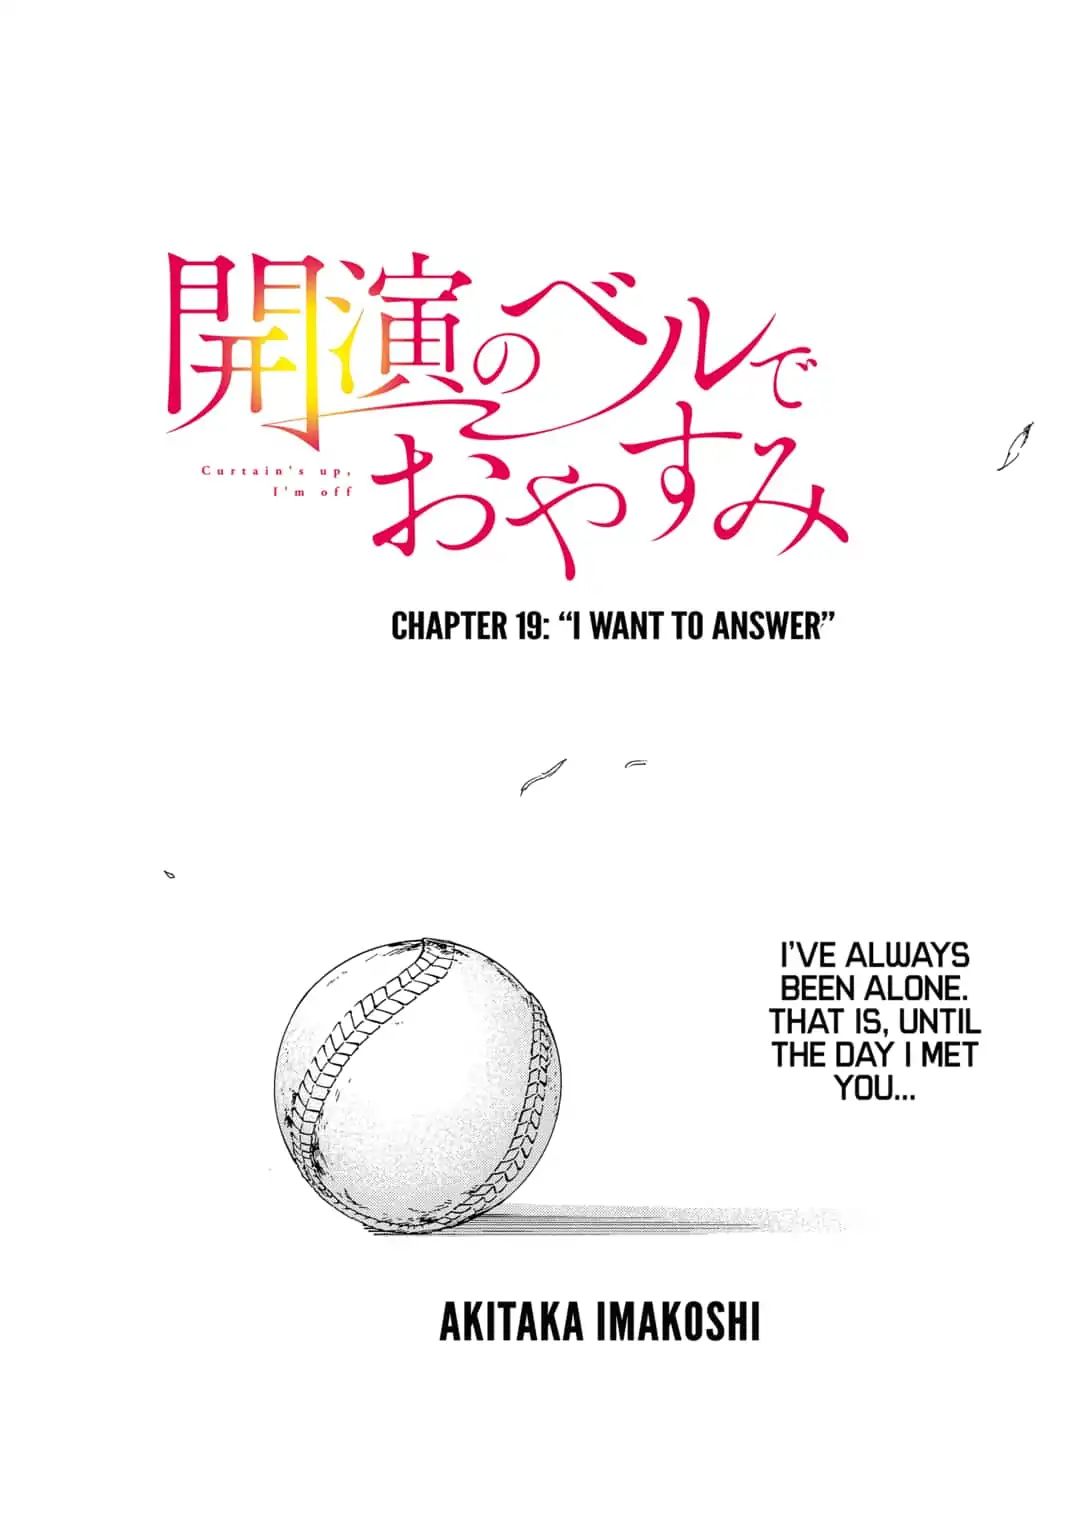 Curtain's up, I'm off Chapter 19: I Want to Answer